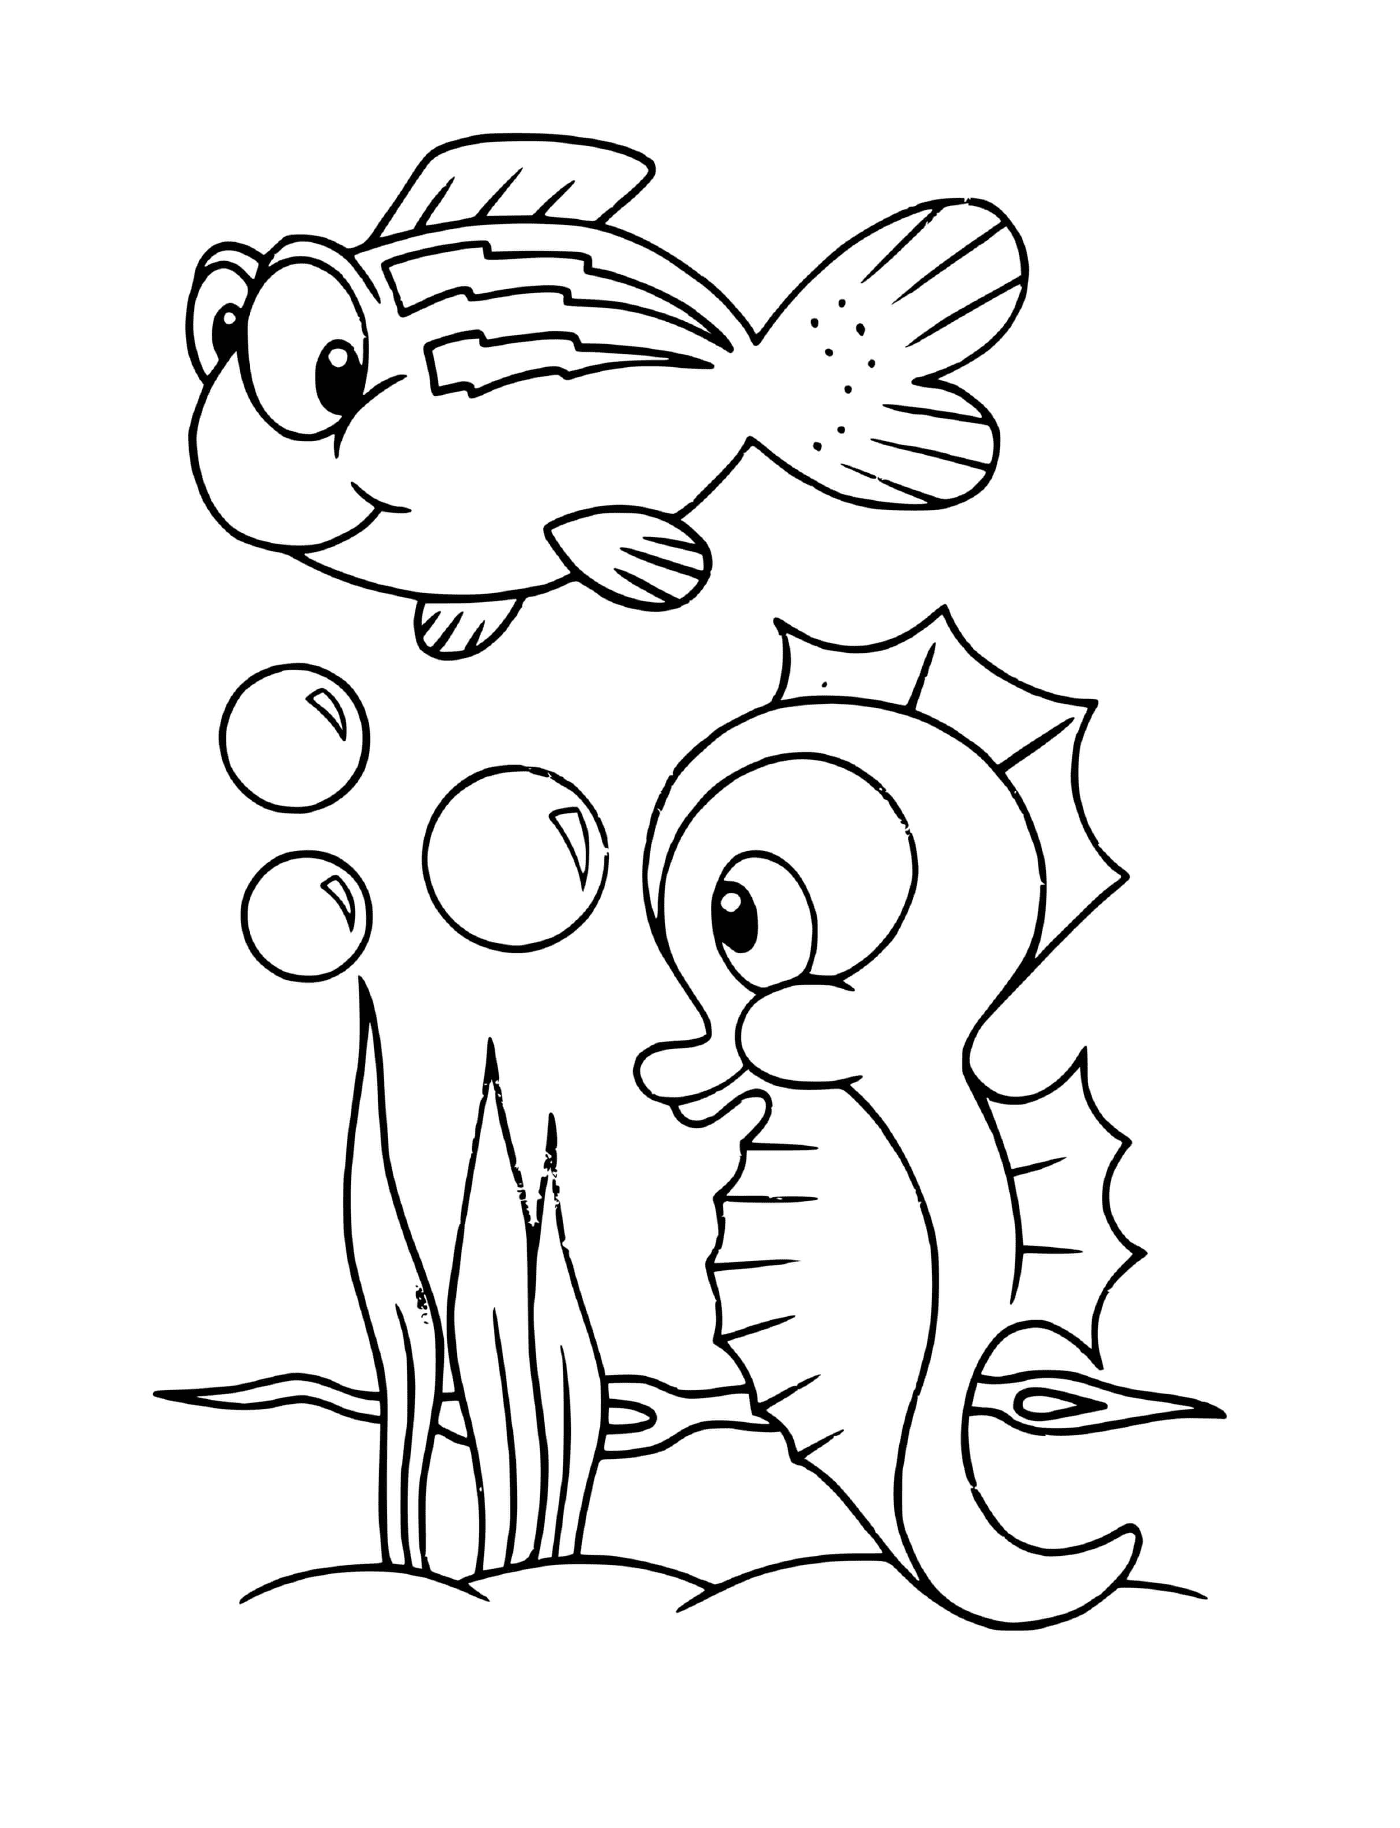  a fish and a seahorse turtle 